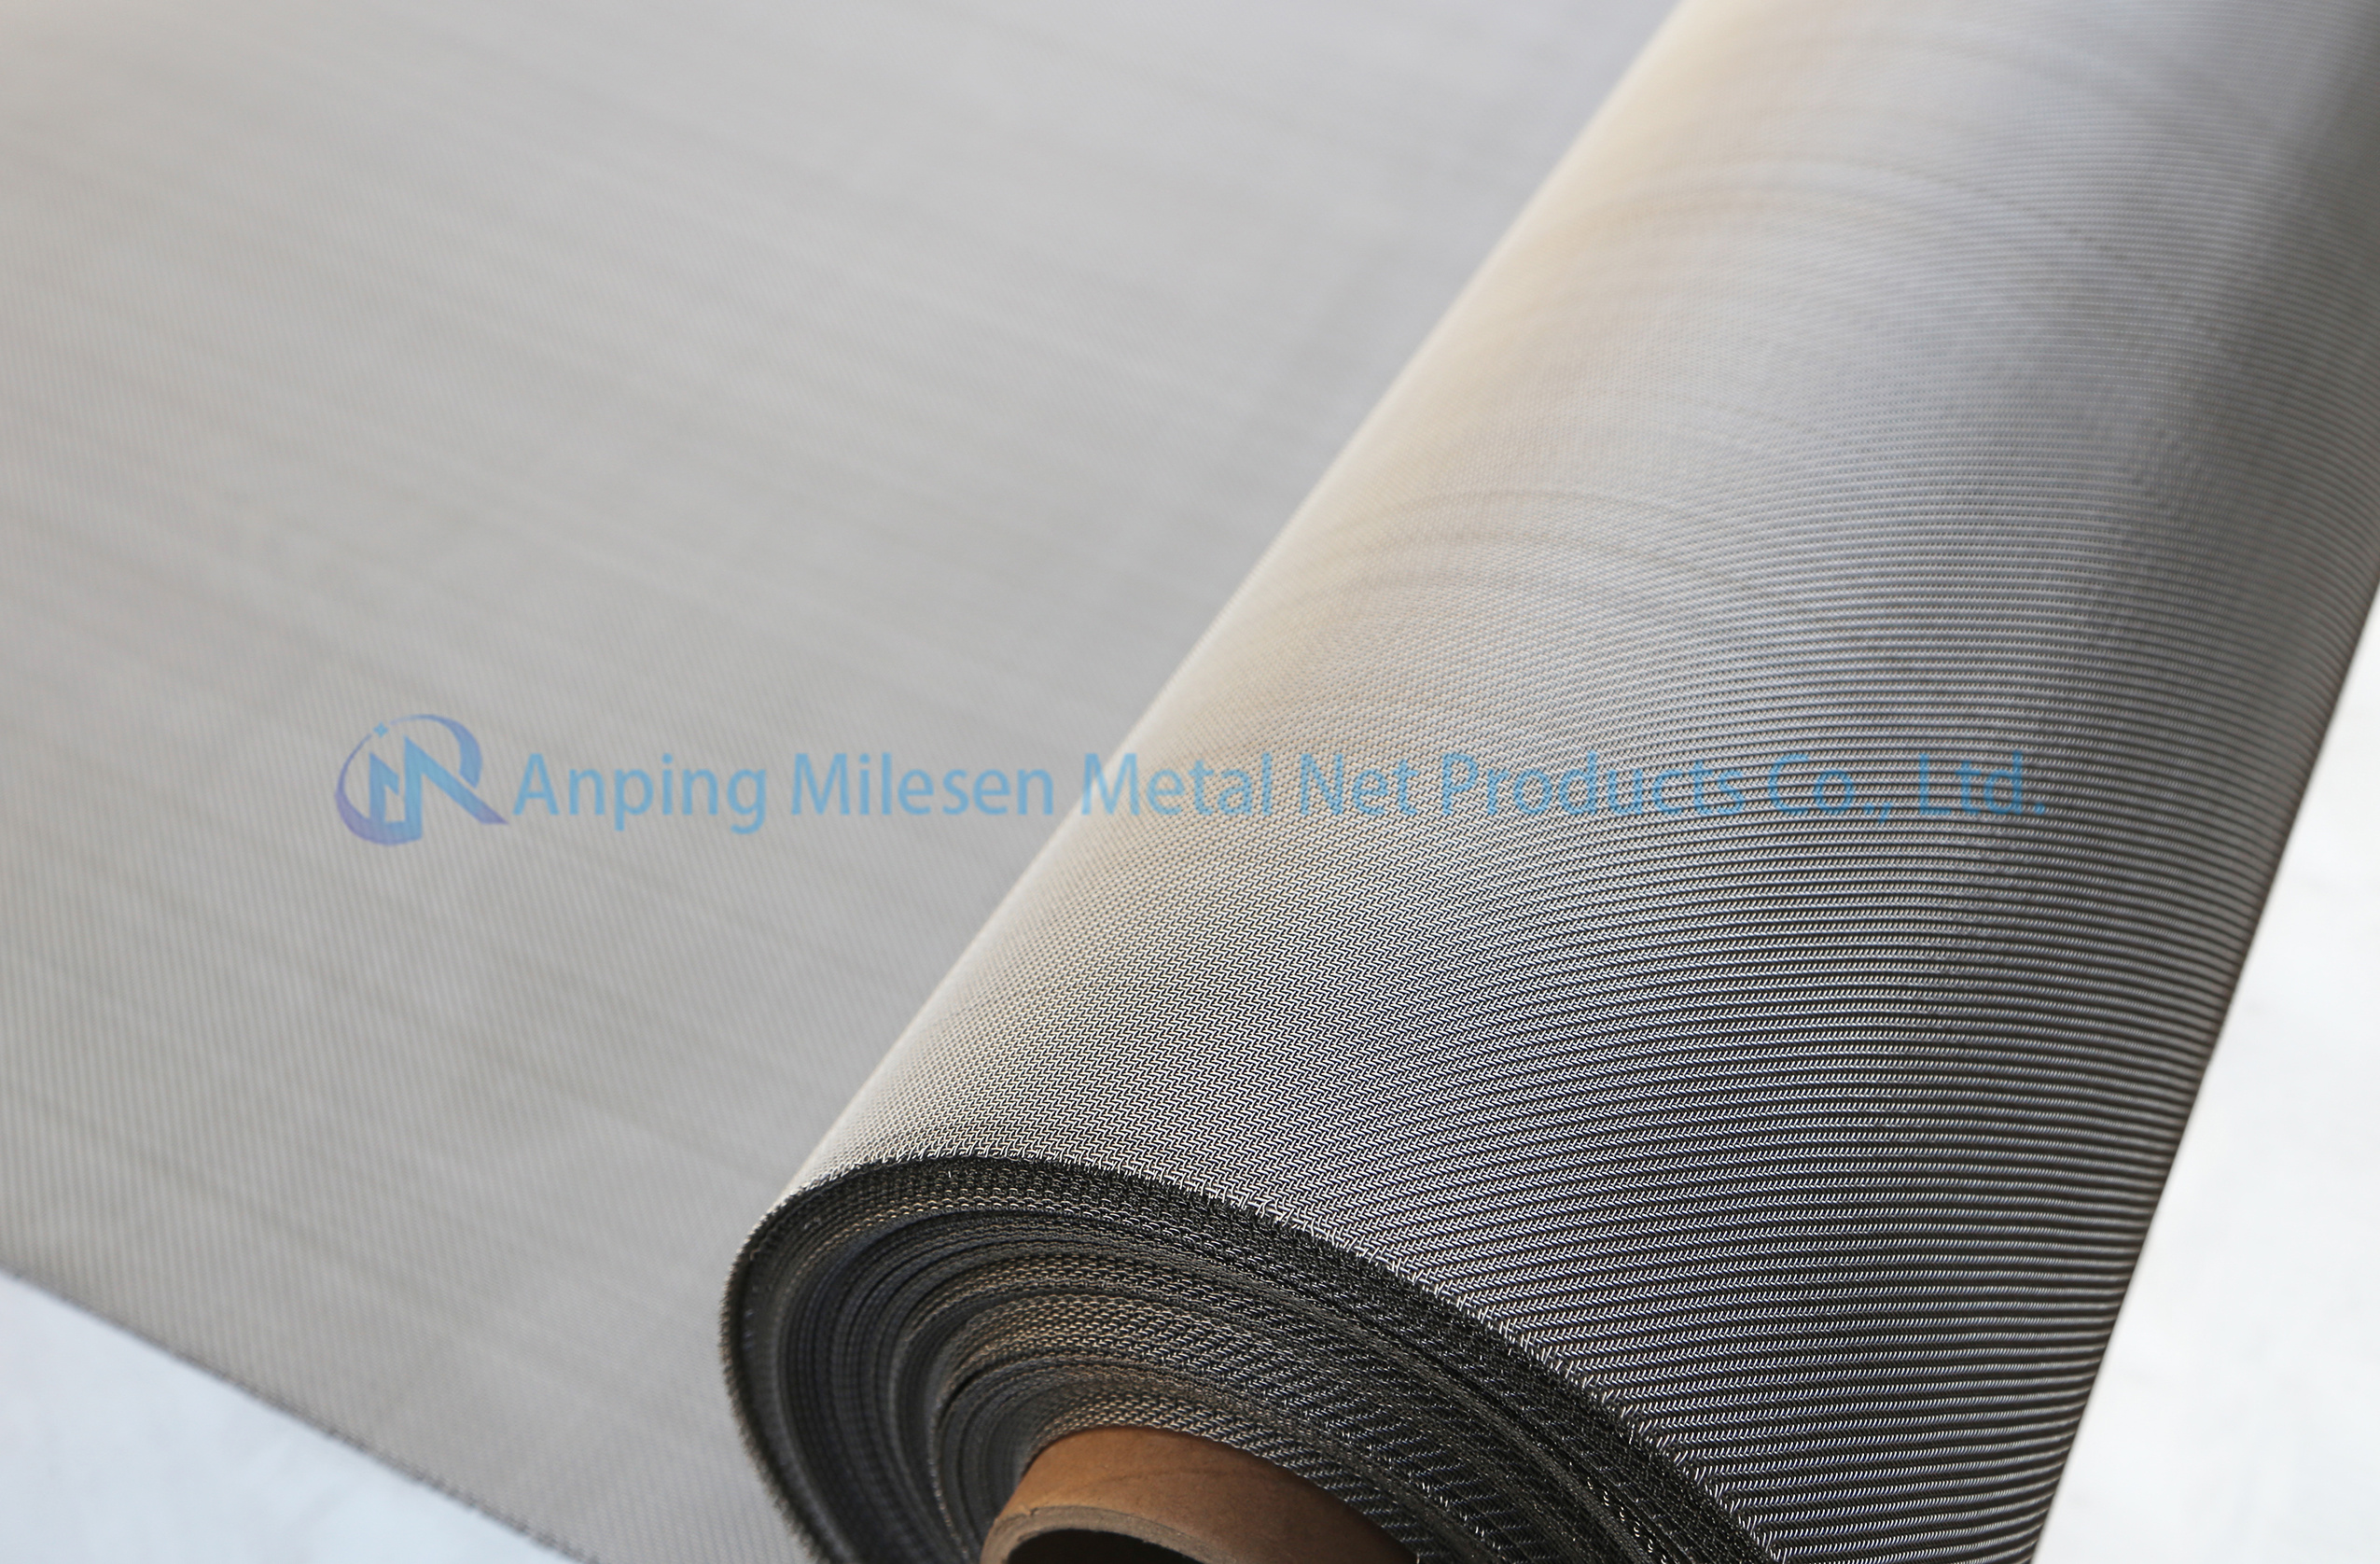 Unmatched durability and reliability: Discover high quality stainless steel wire mesh